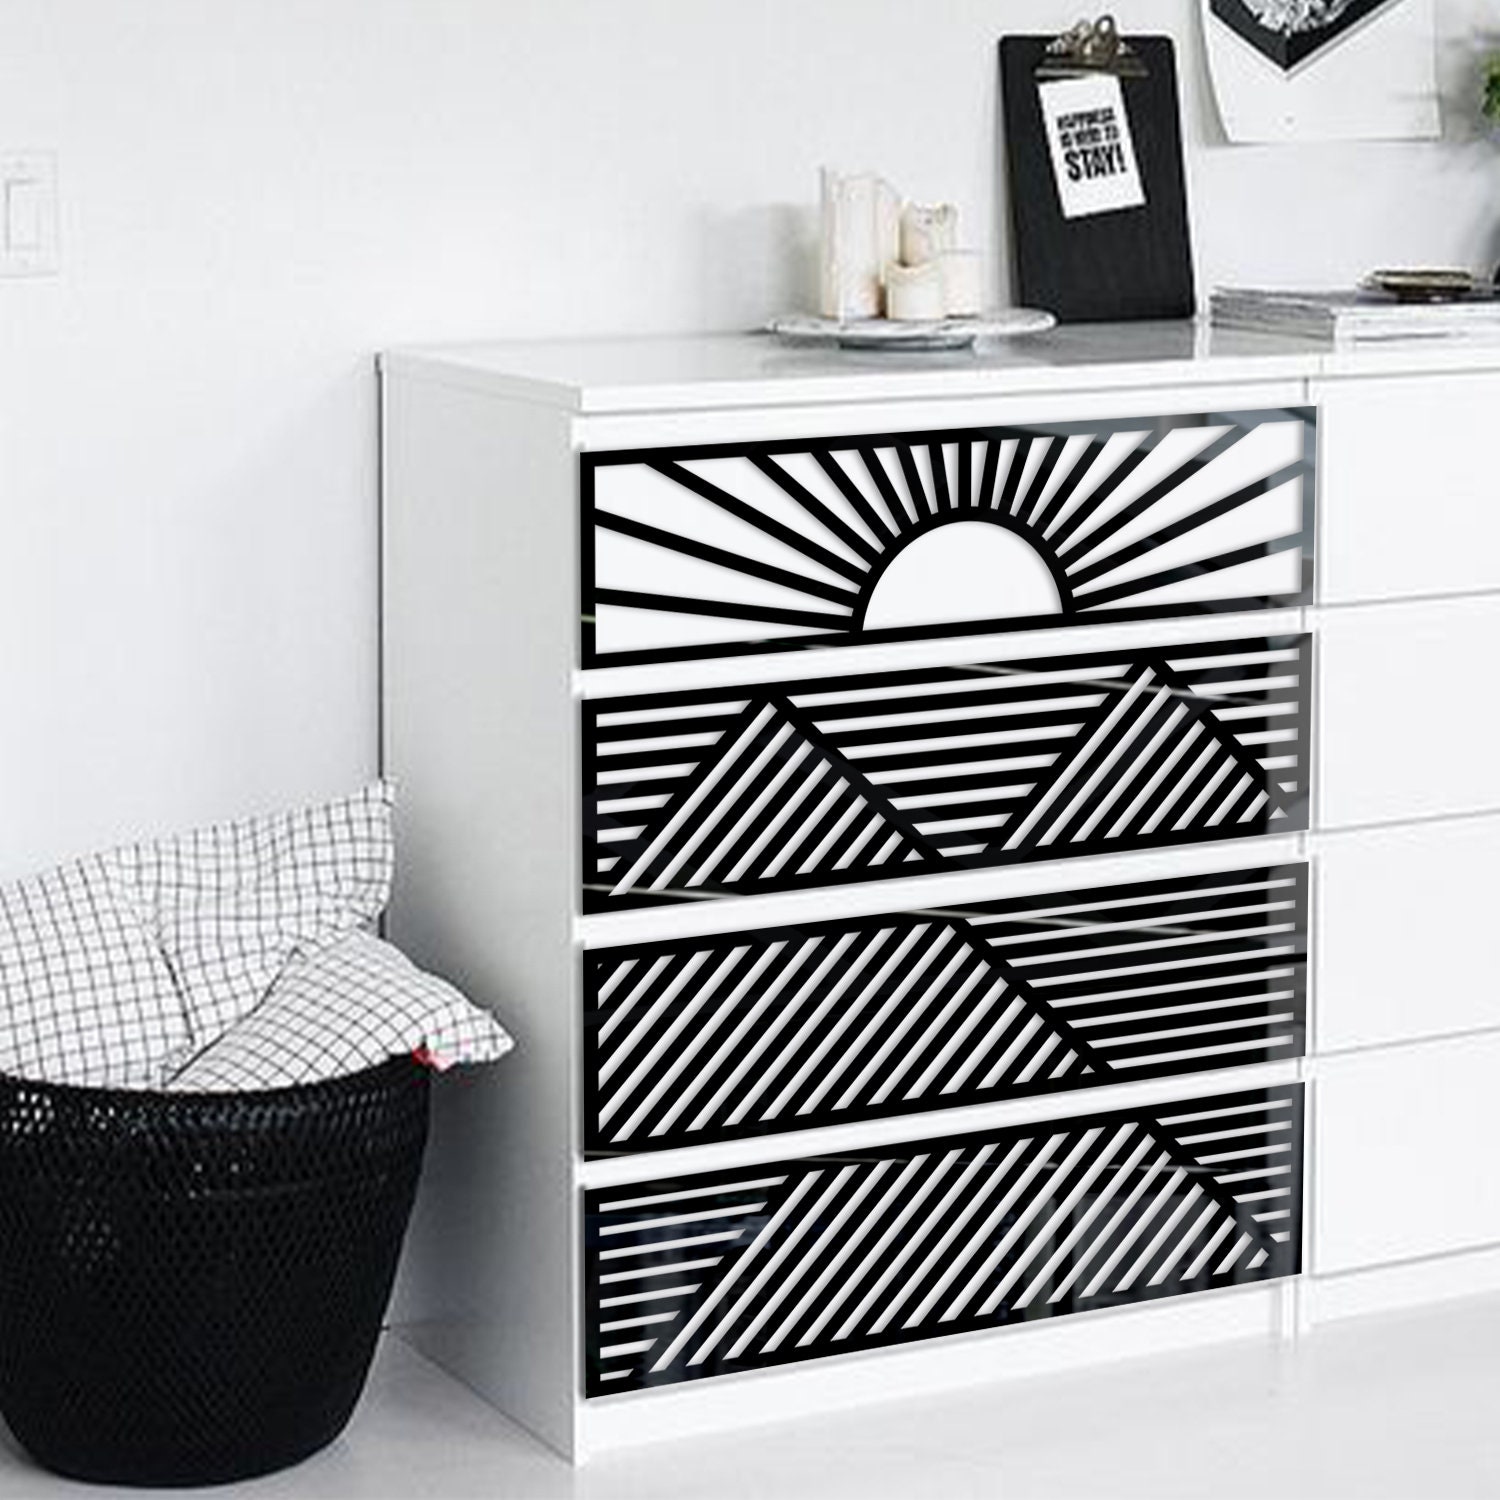 Wooden dresser overlays with rattan pattern for IKEA® malm